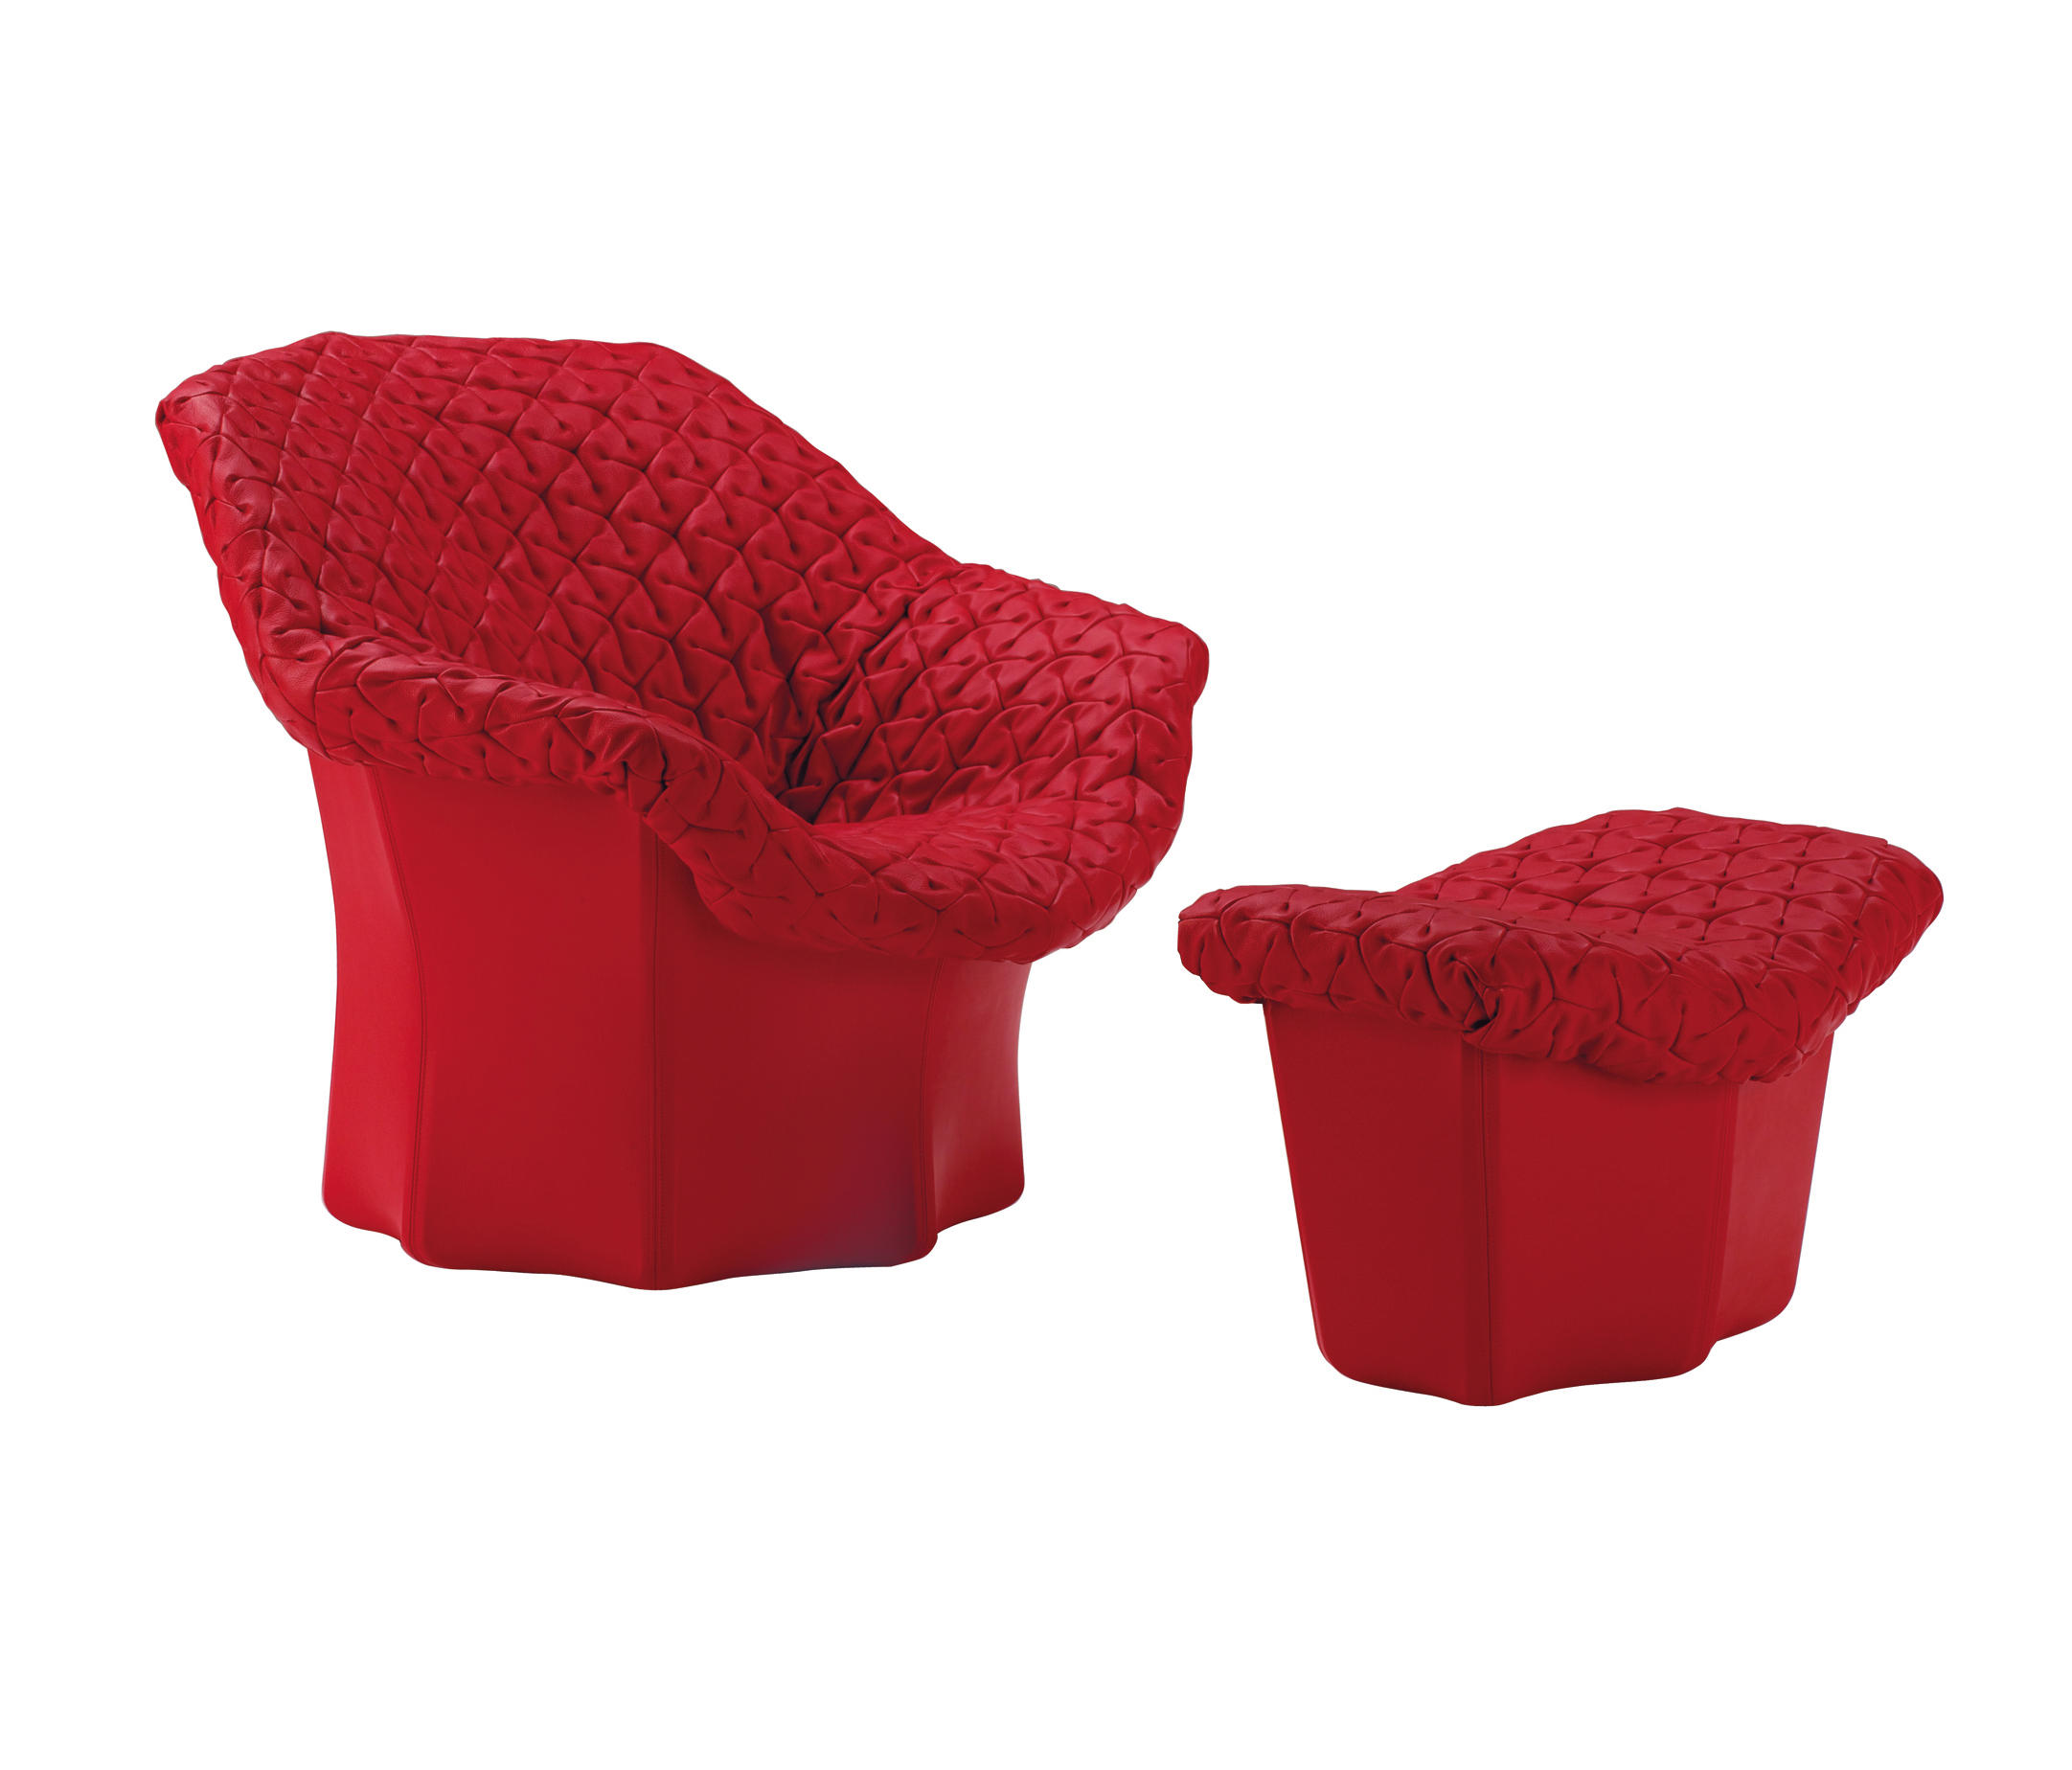 Juliet Armchairs From Poltrona Frau Architonic in juliet armchairs with regard to  Household